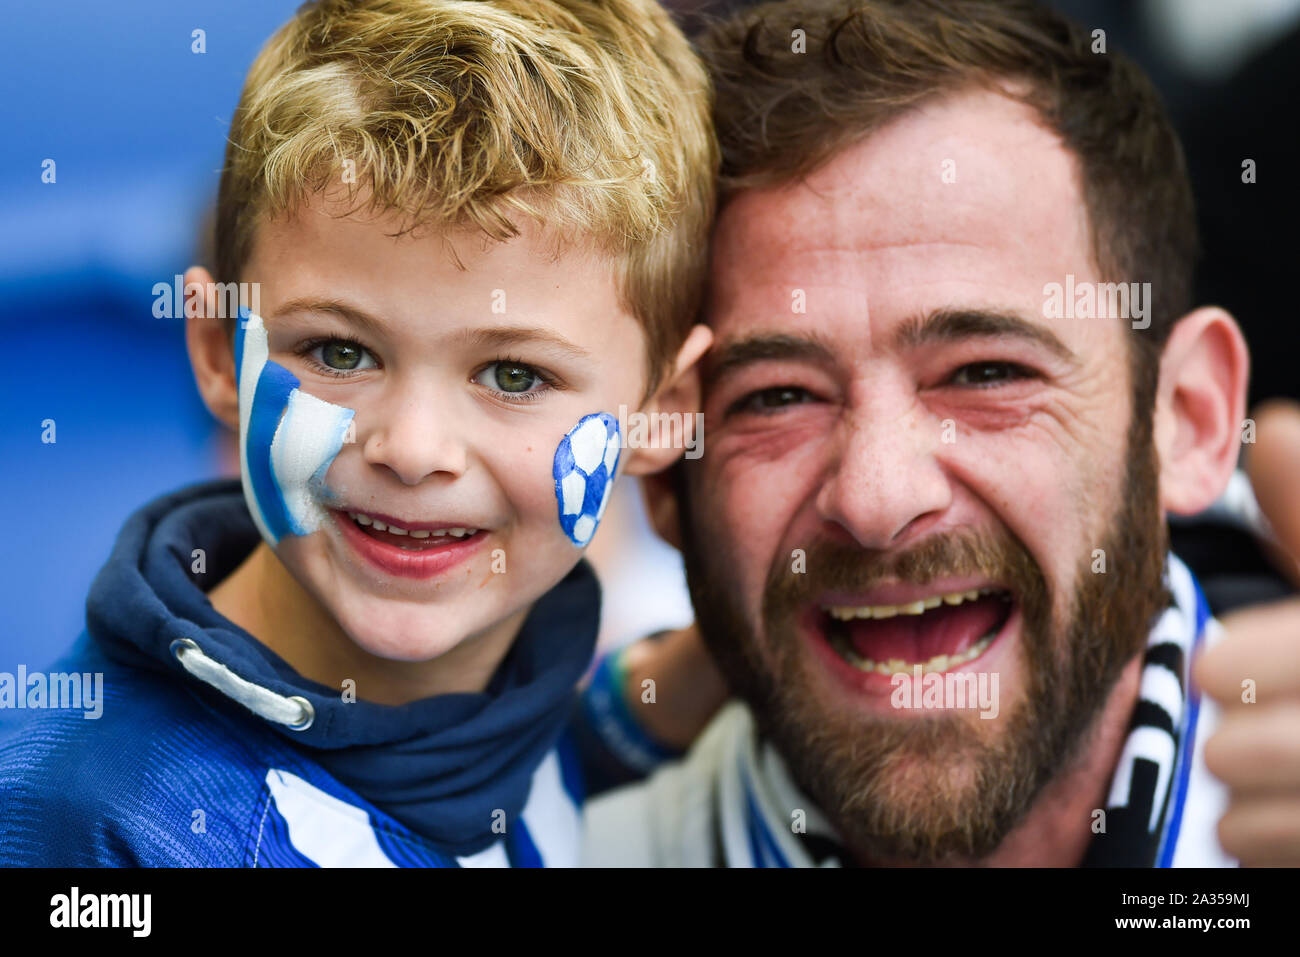 Brighton UK 5th October -  Fans during the Premier League match between  Brighton and Hove Albion and Tottenham Hotspur at the Amex Stadium - Editorial use only. No merchandising. For Football images FA and Premier League restrictions apply inc. no internet/mobile usage without FAPL license - for details contact Football Dataco  : Credit Simon Dack TPI / Alamy Live News Stock Photo